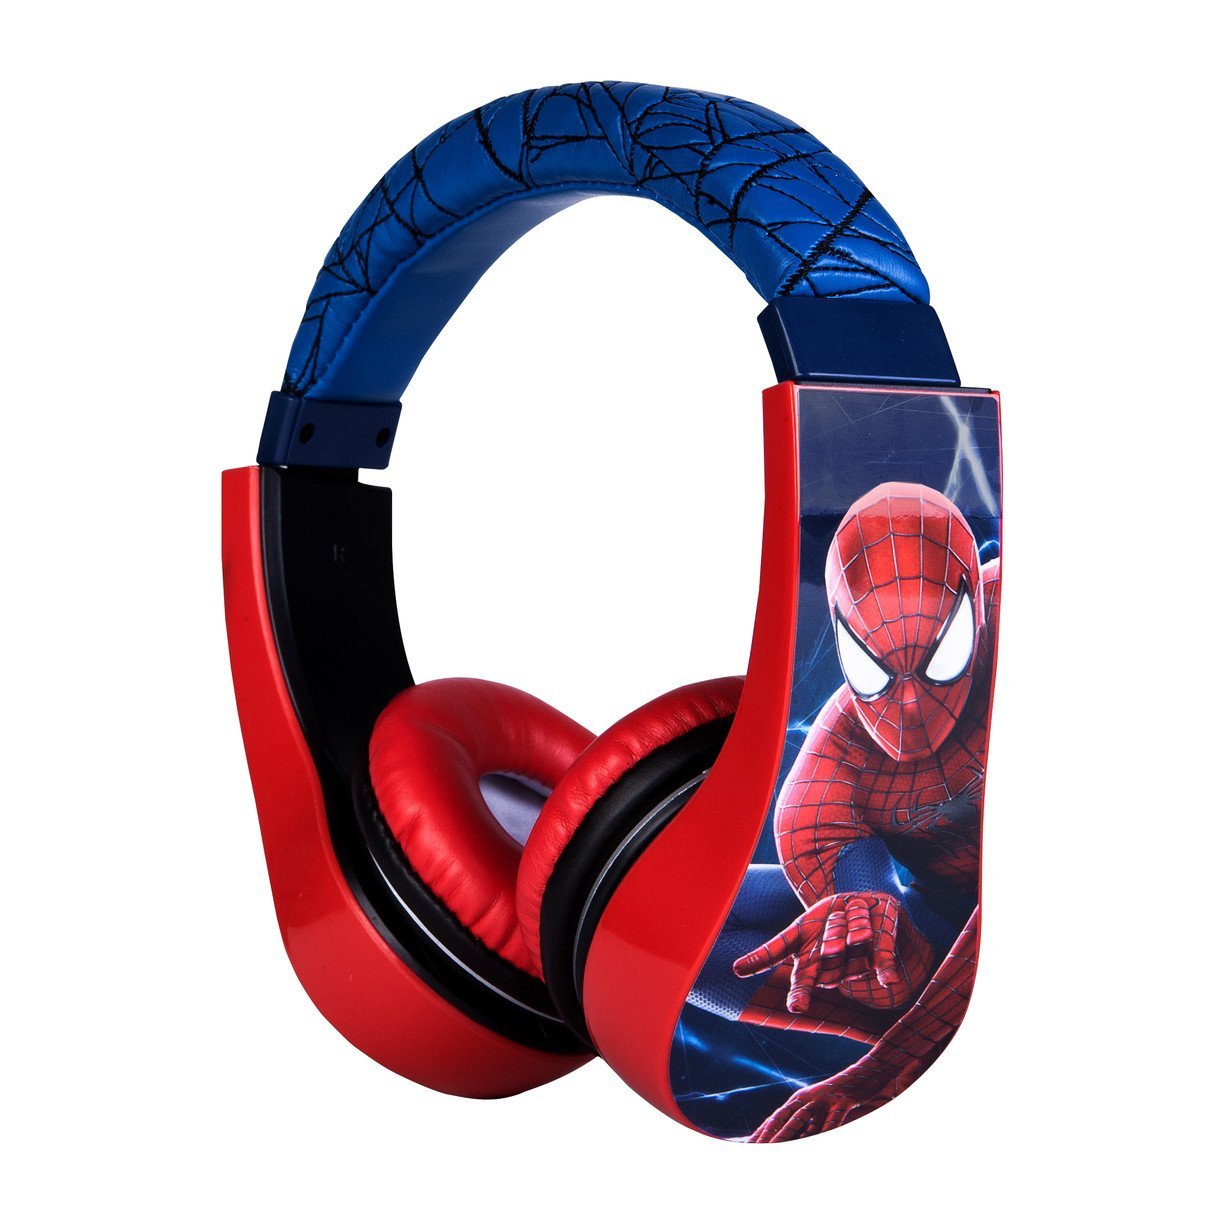 Spiderman Kid Safe over the Ear Headphone with Volume Limiter.